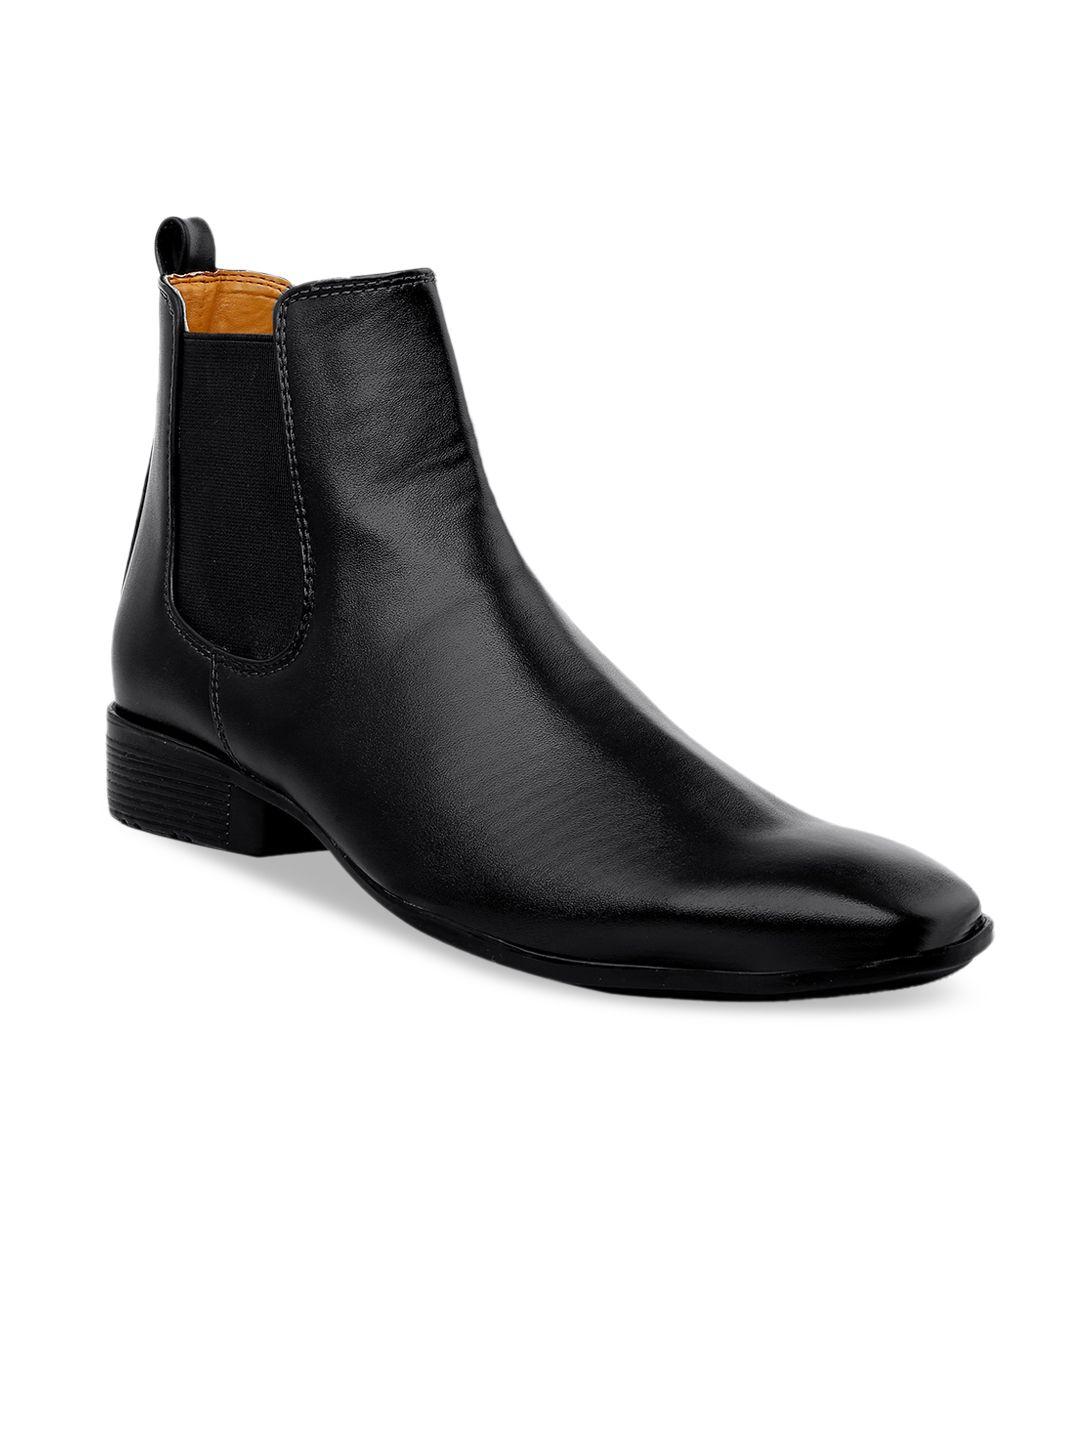 the roadster lifestyle co. men black square toe mid top chelsea boots